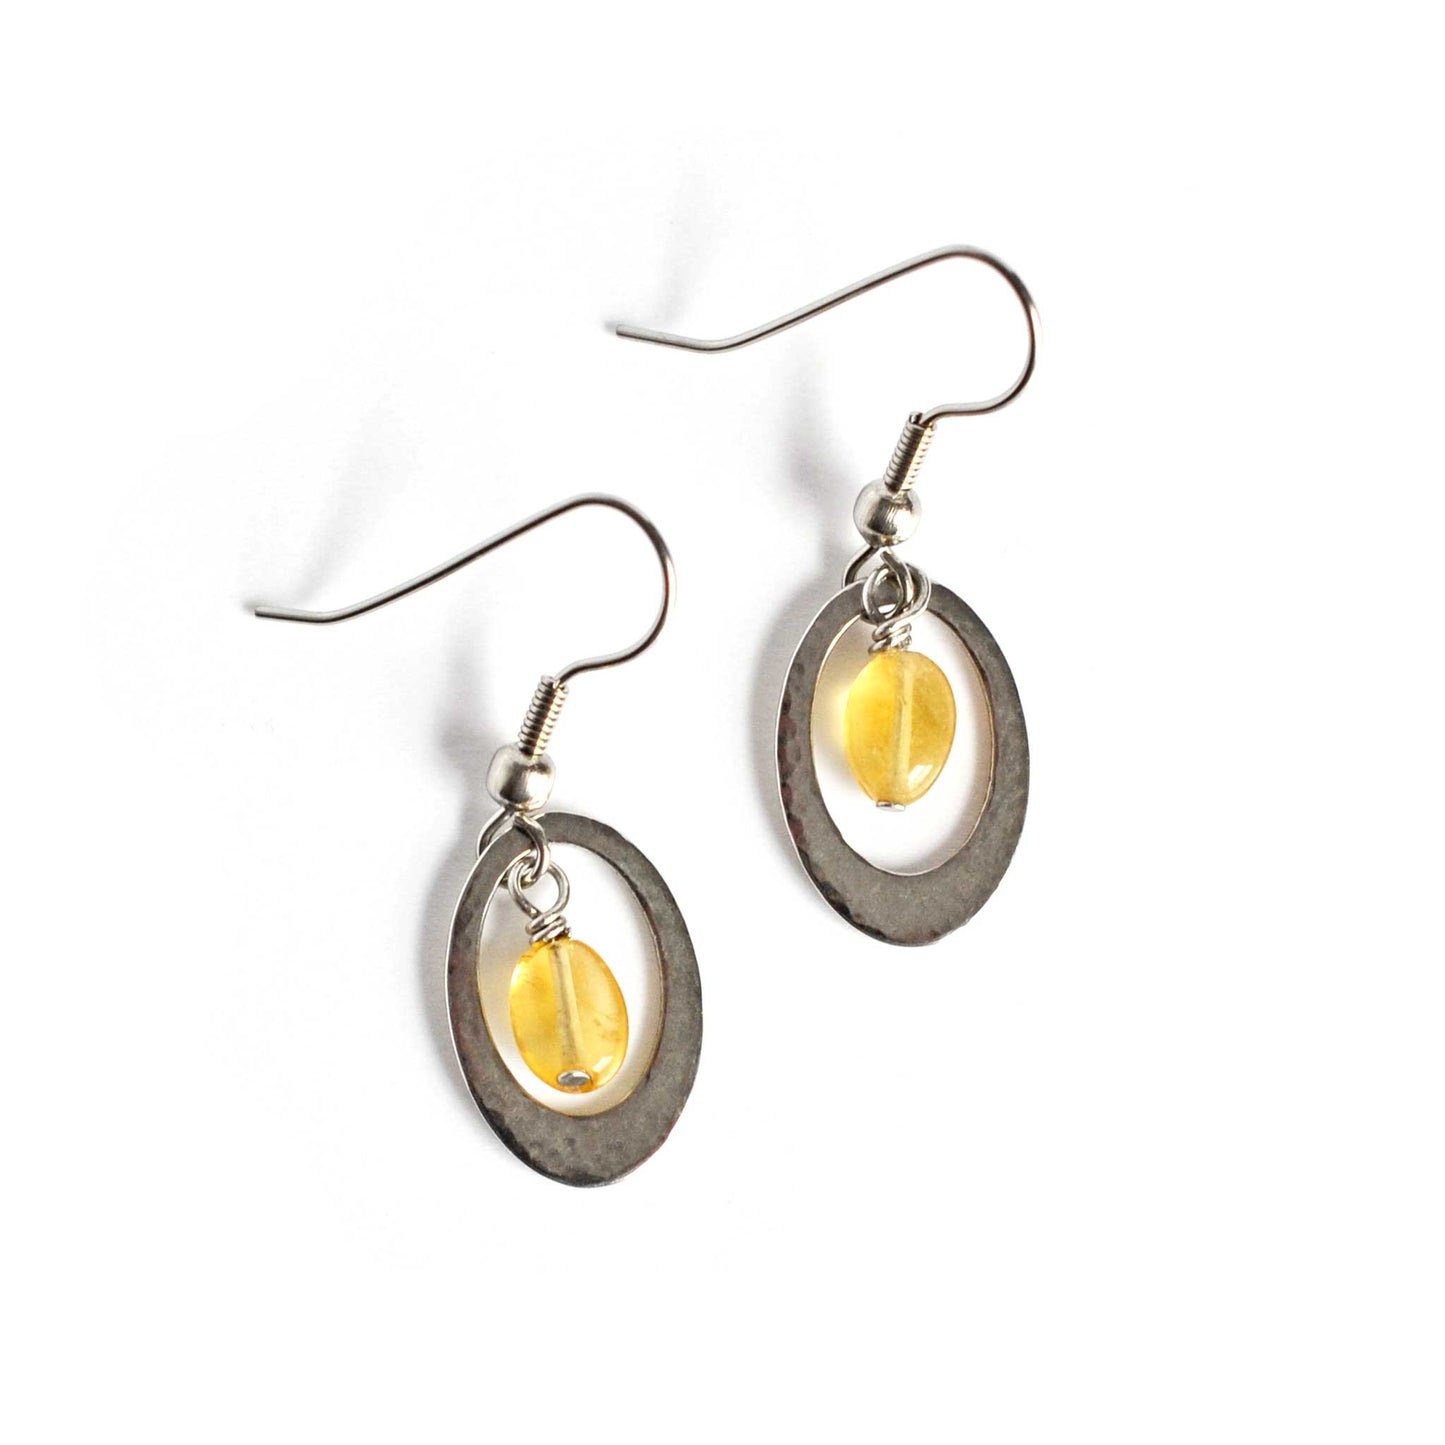 Hammered oval and yellow Citrine gemstone drop earrings on white background.